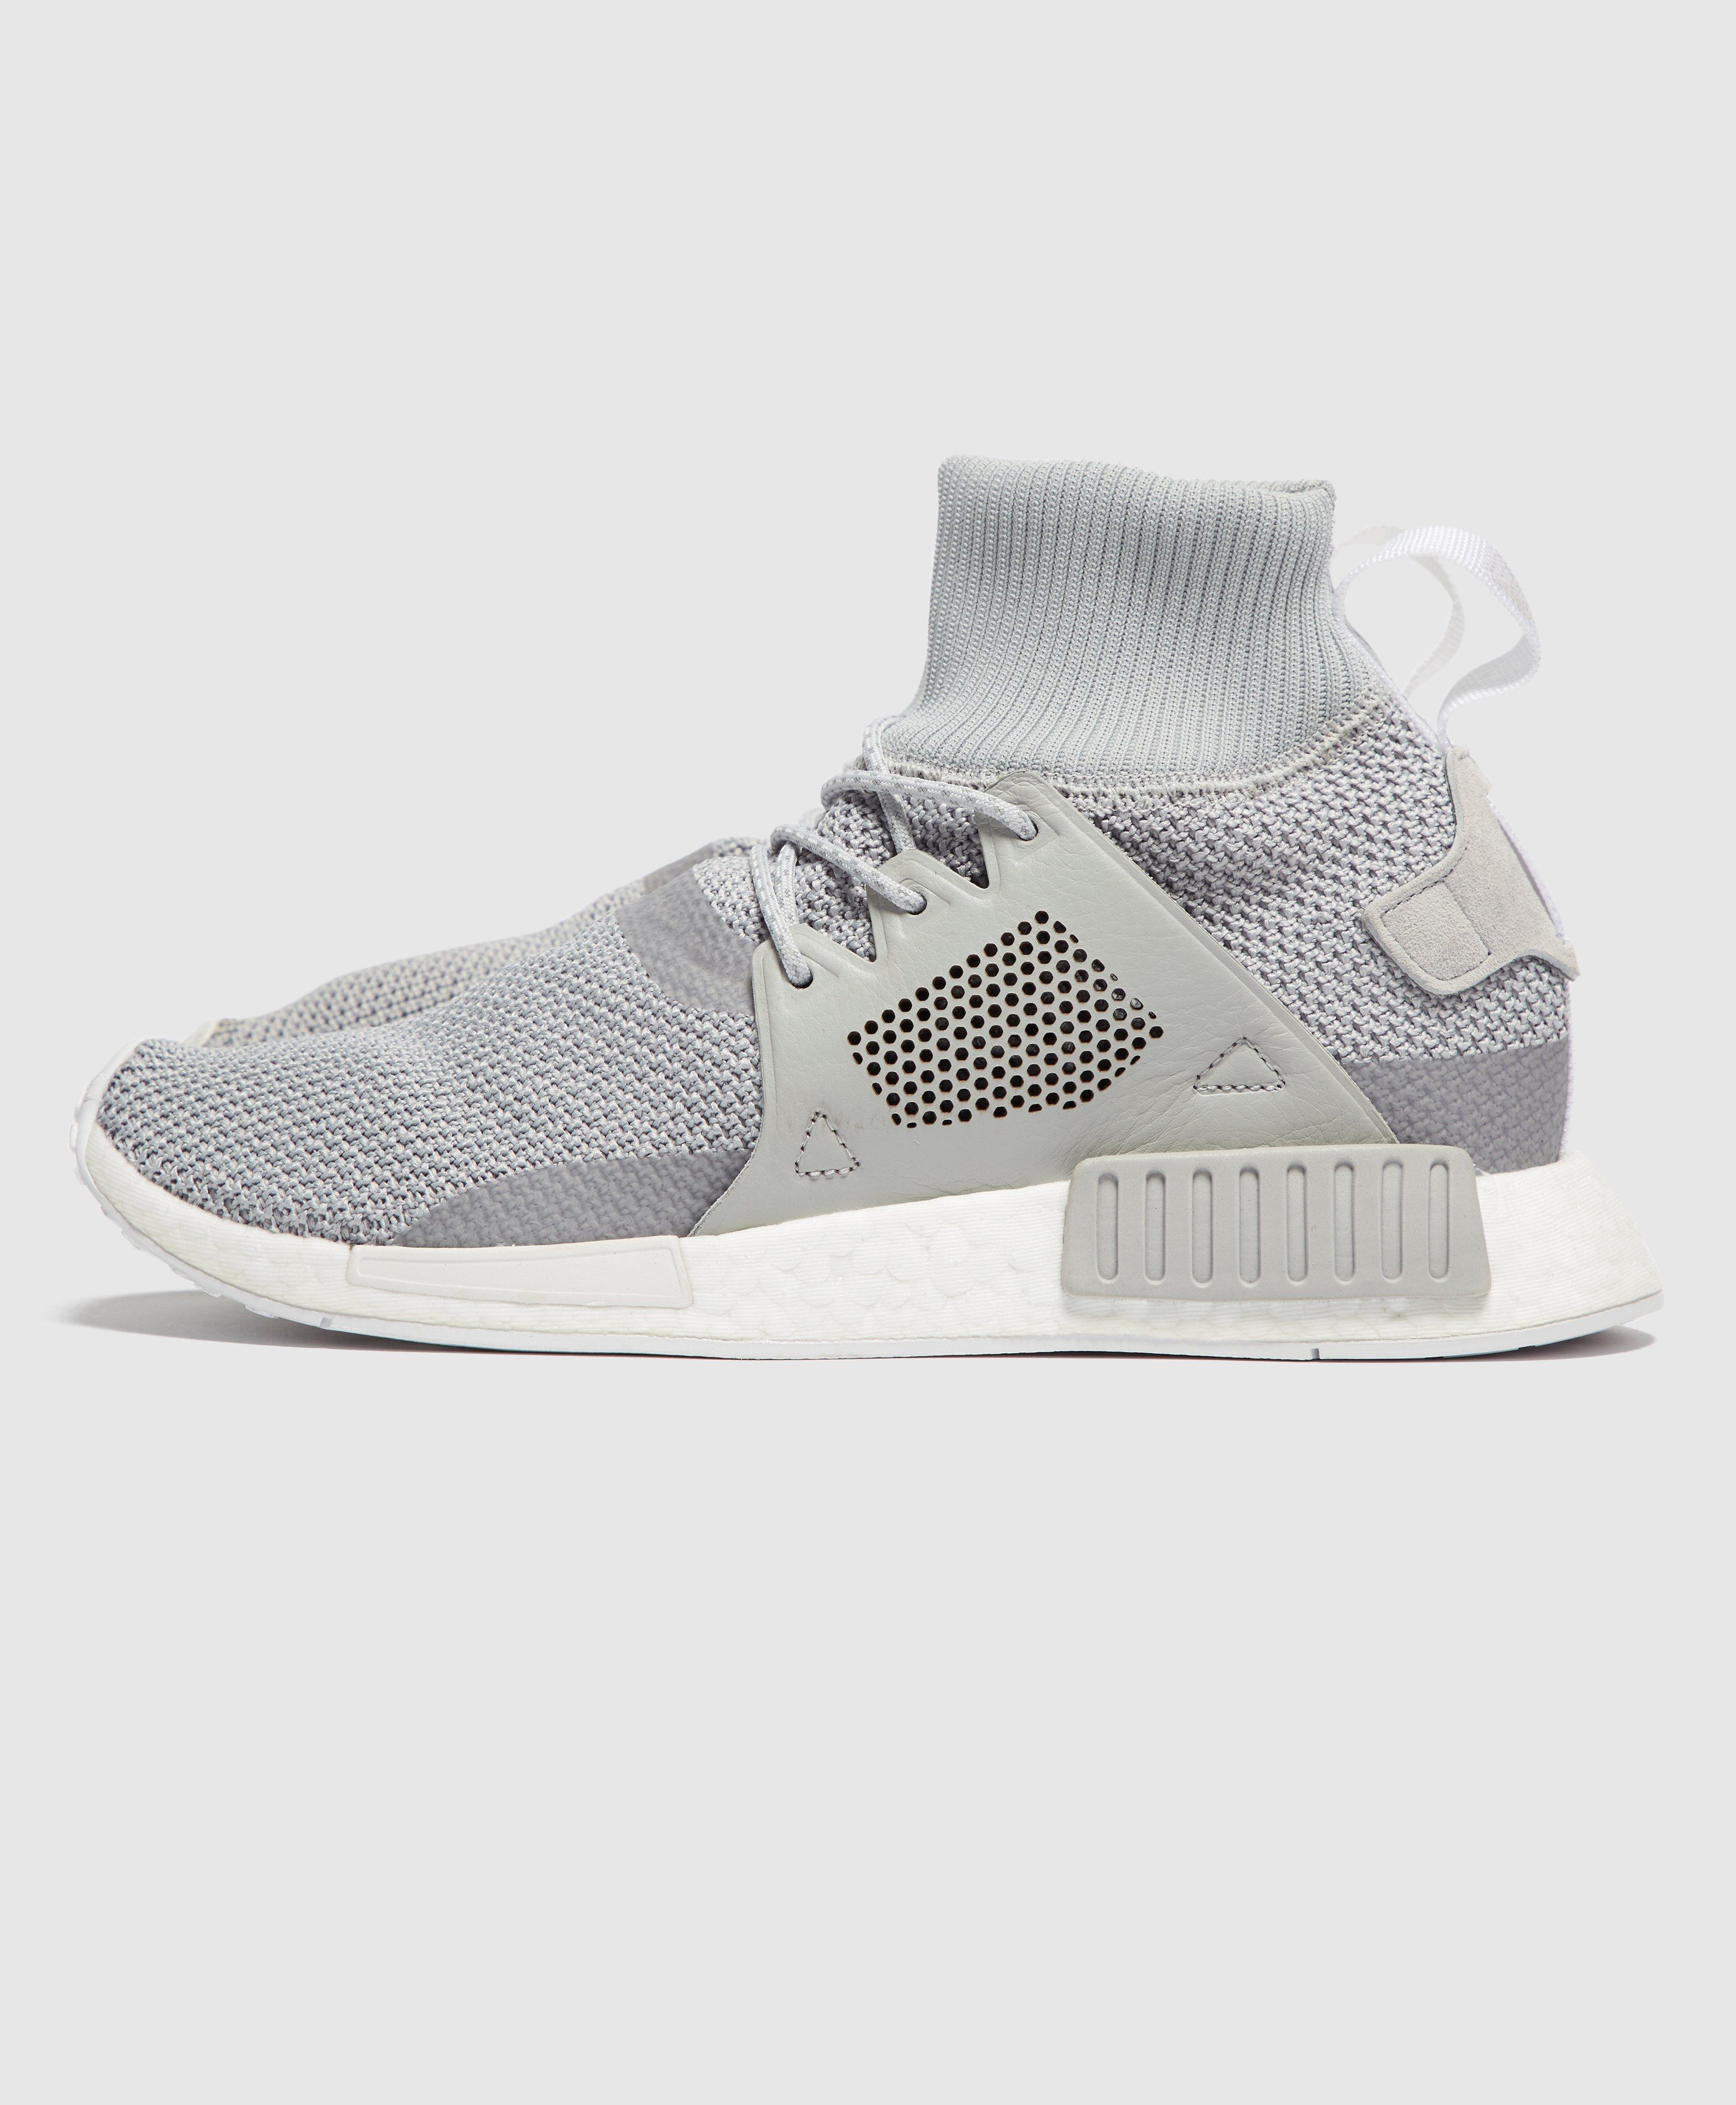 Henry Poole sized Adidas NMD xr1 2 sneakers